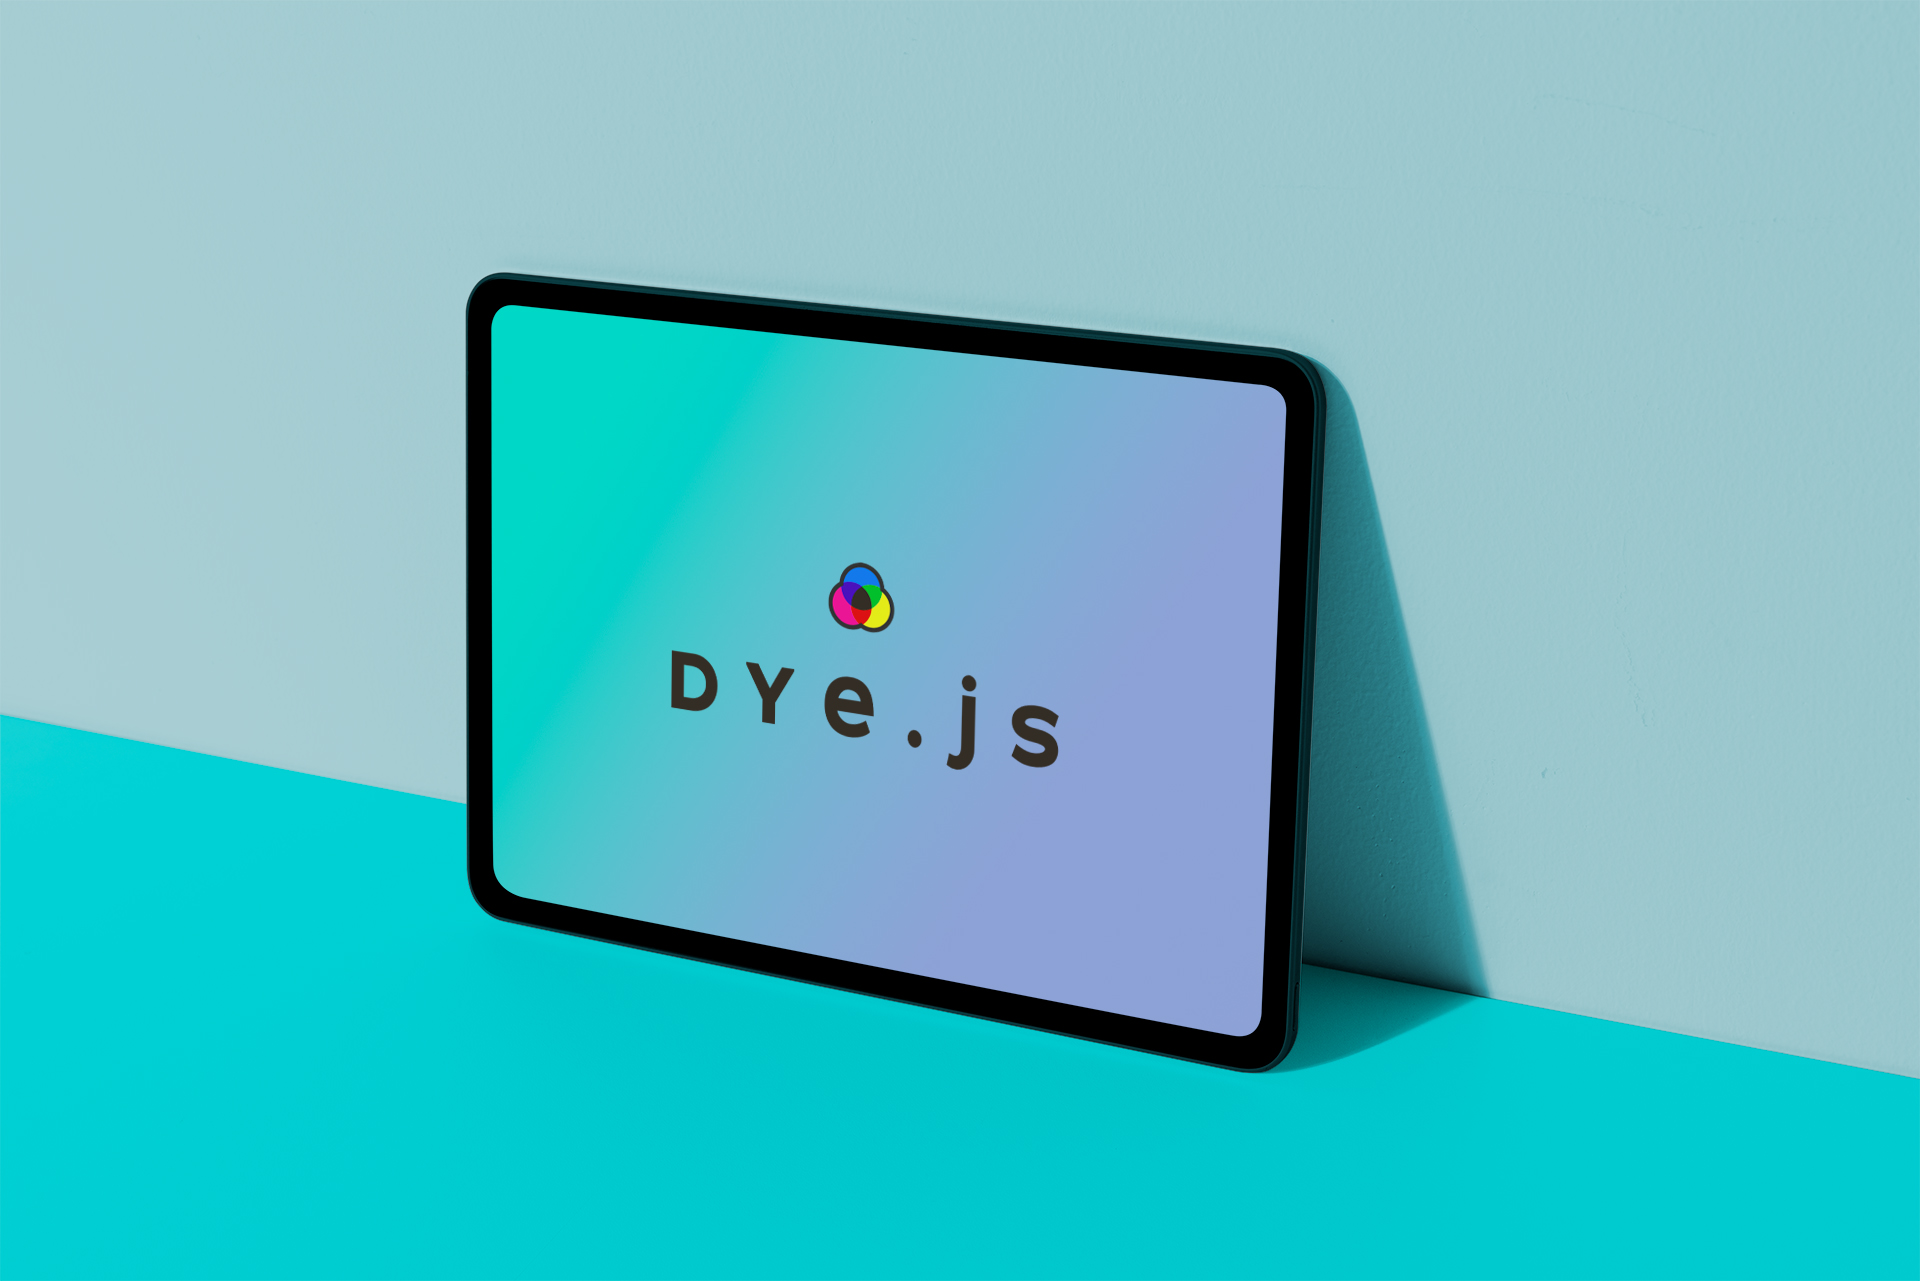 dye.js - Tiny Library that changes HTML elements colors based on their parent background color